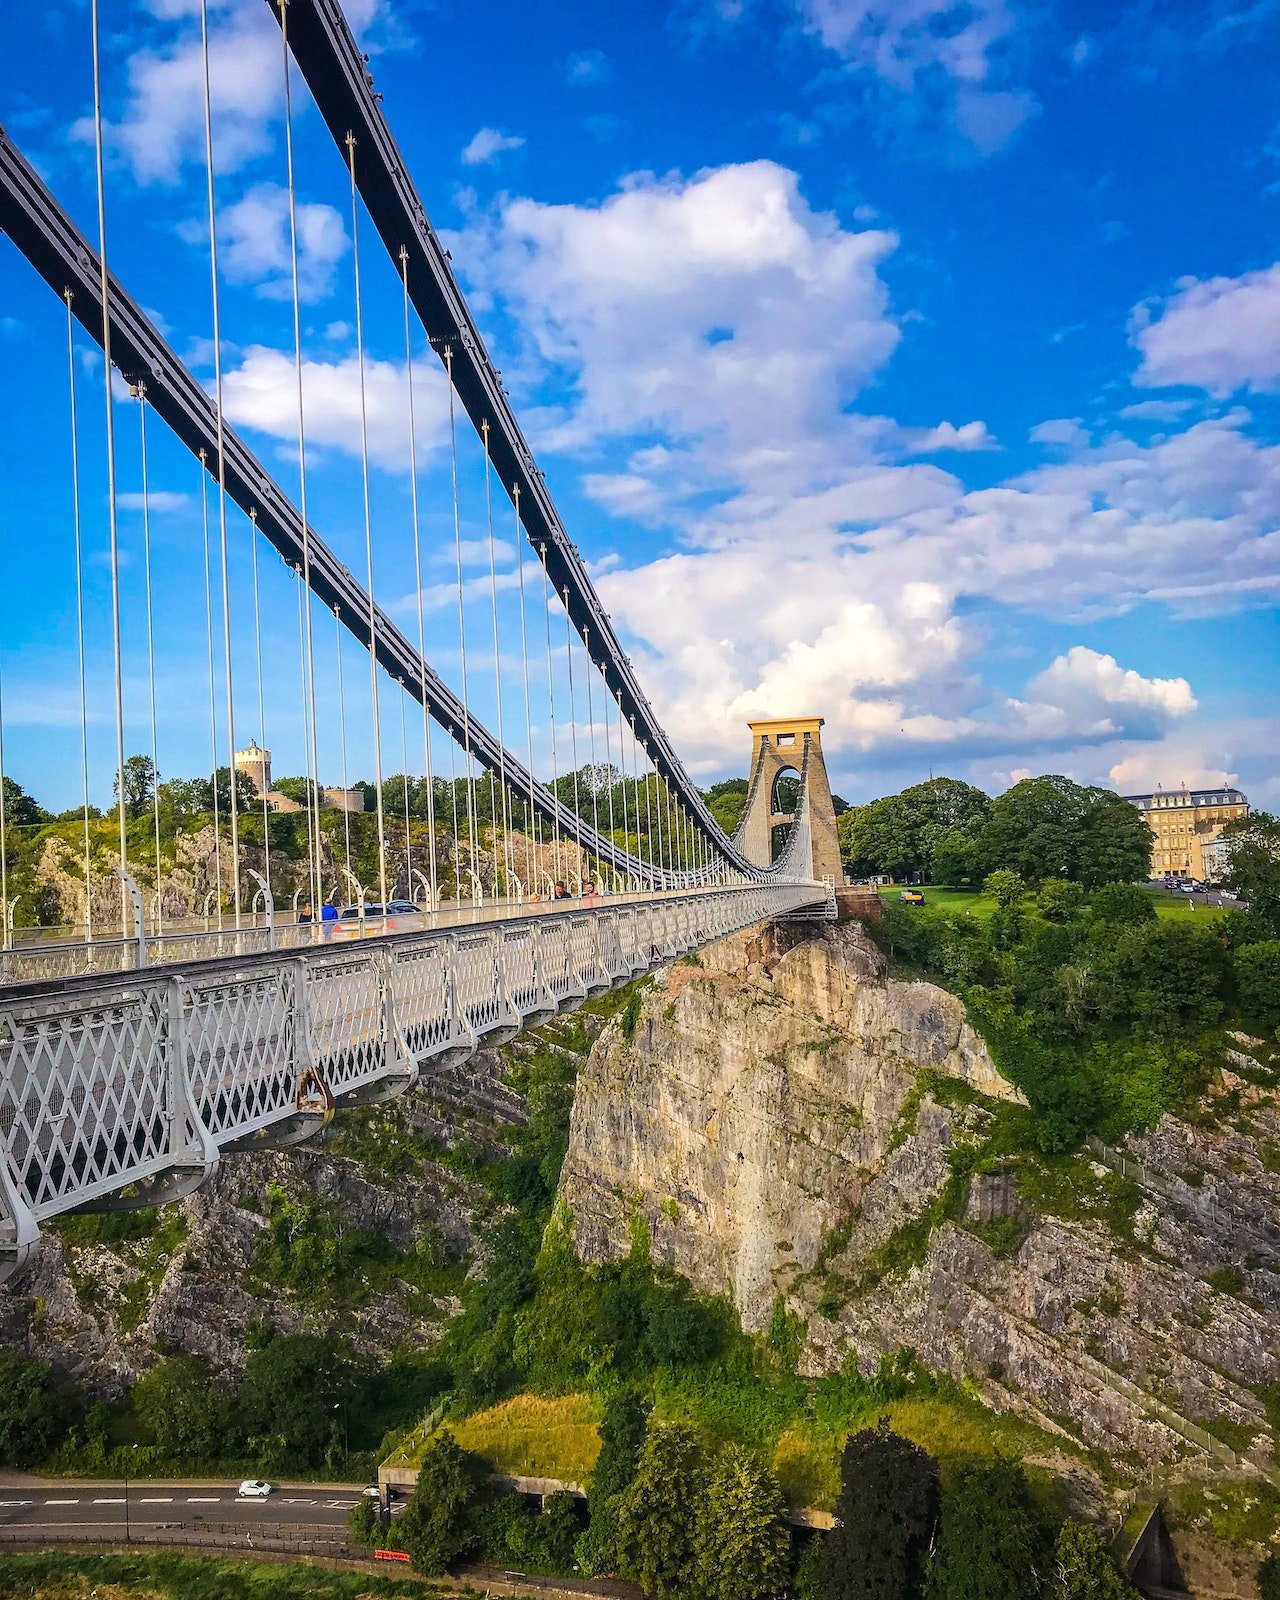 View of Clifton suspension bridge on a sunny day